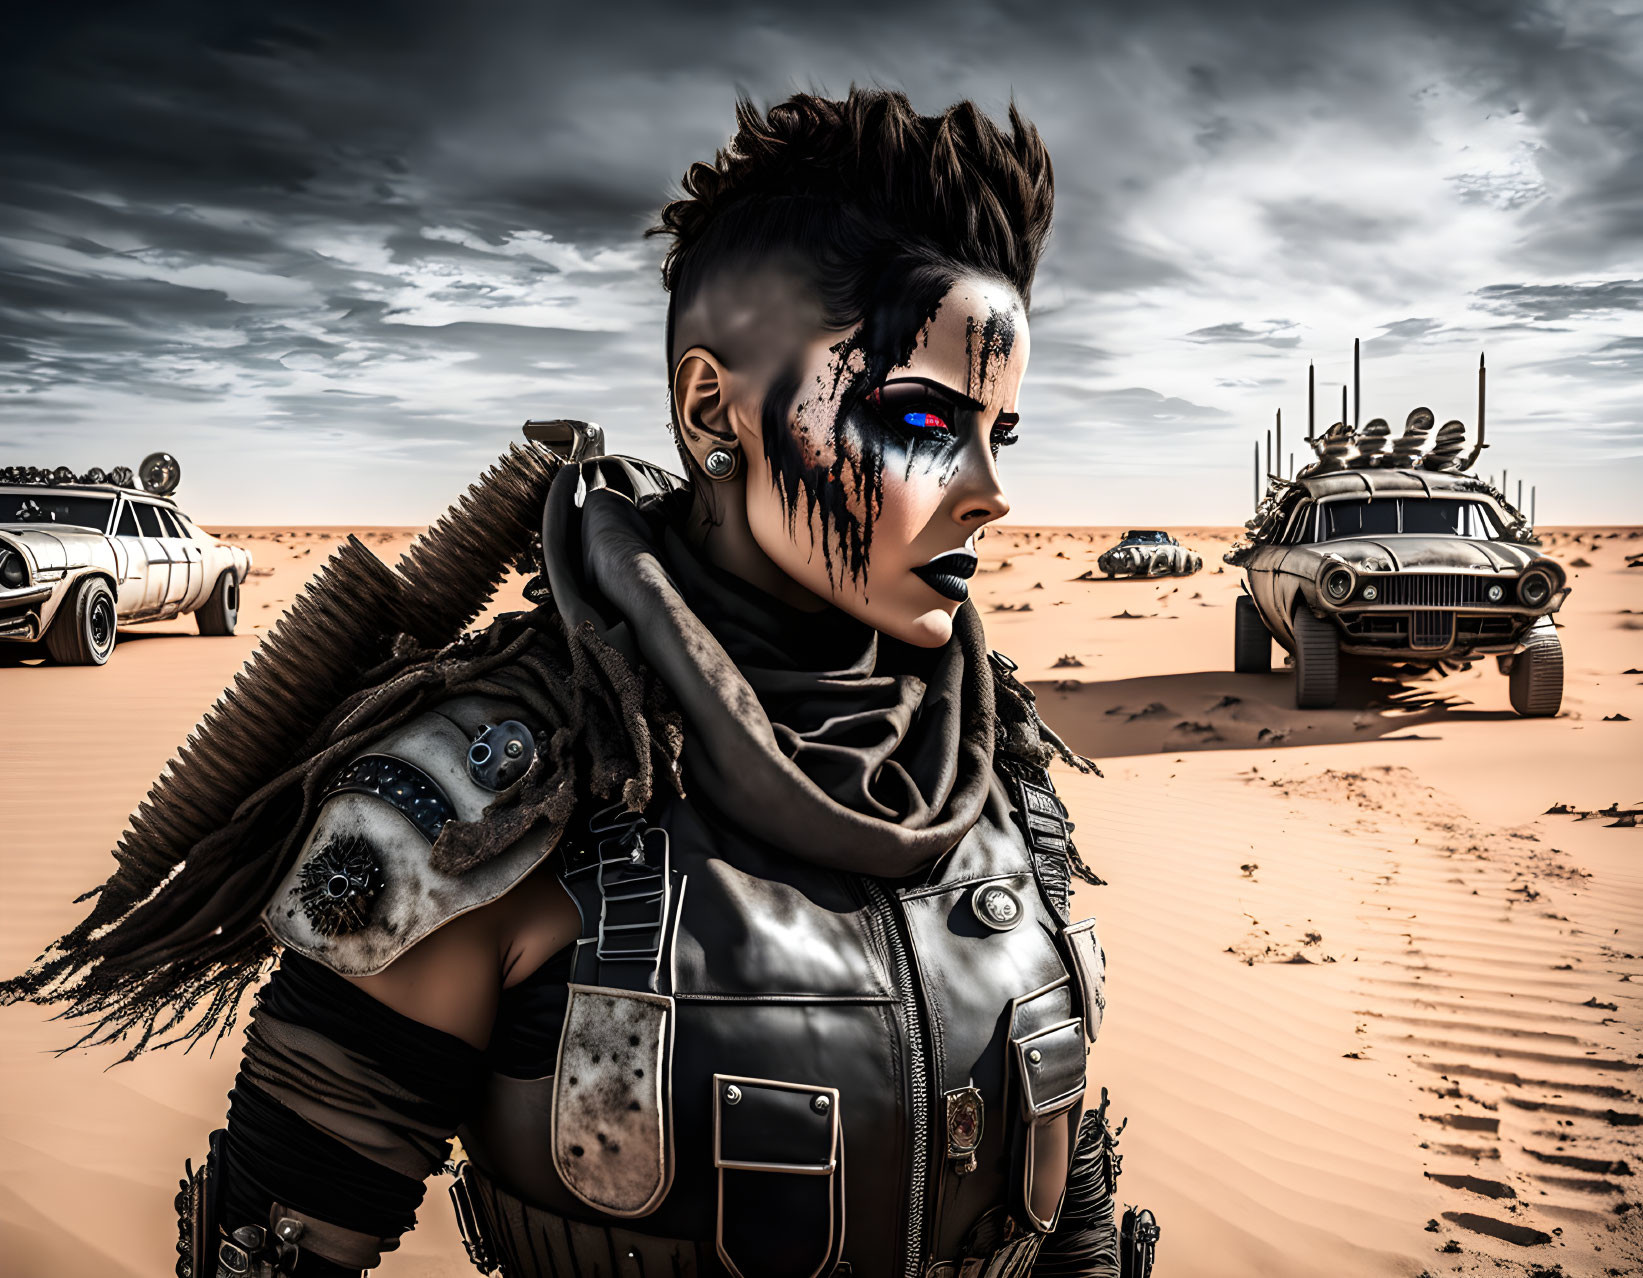 Mad Max inspired